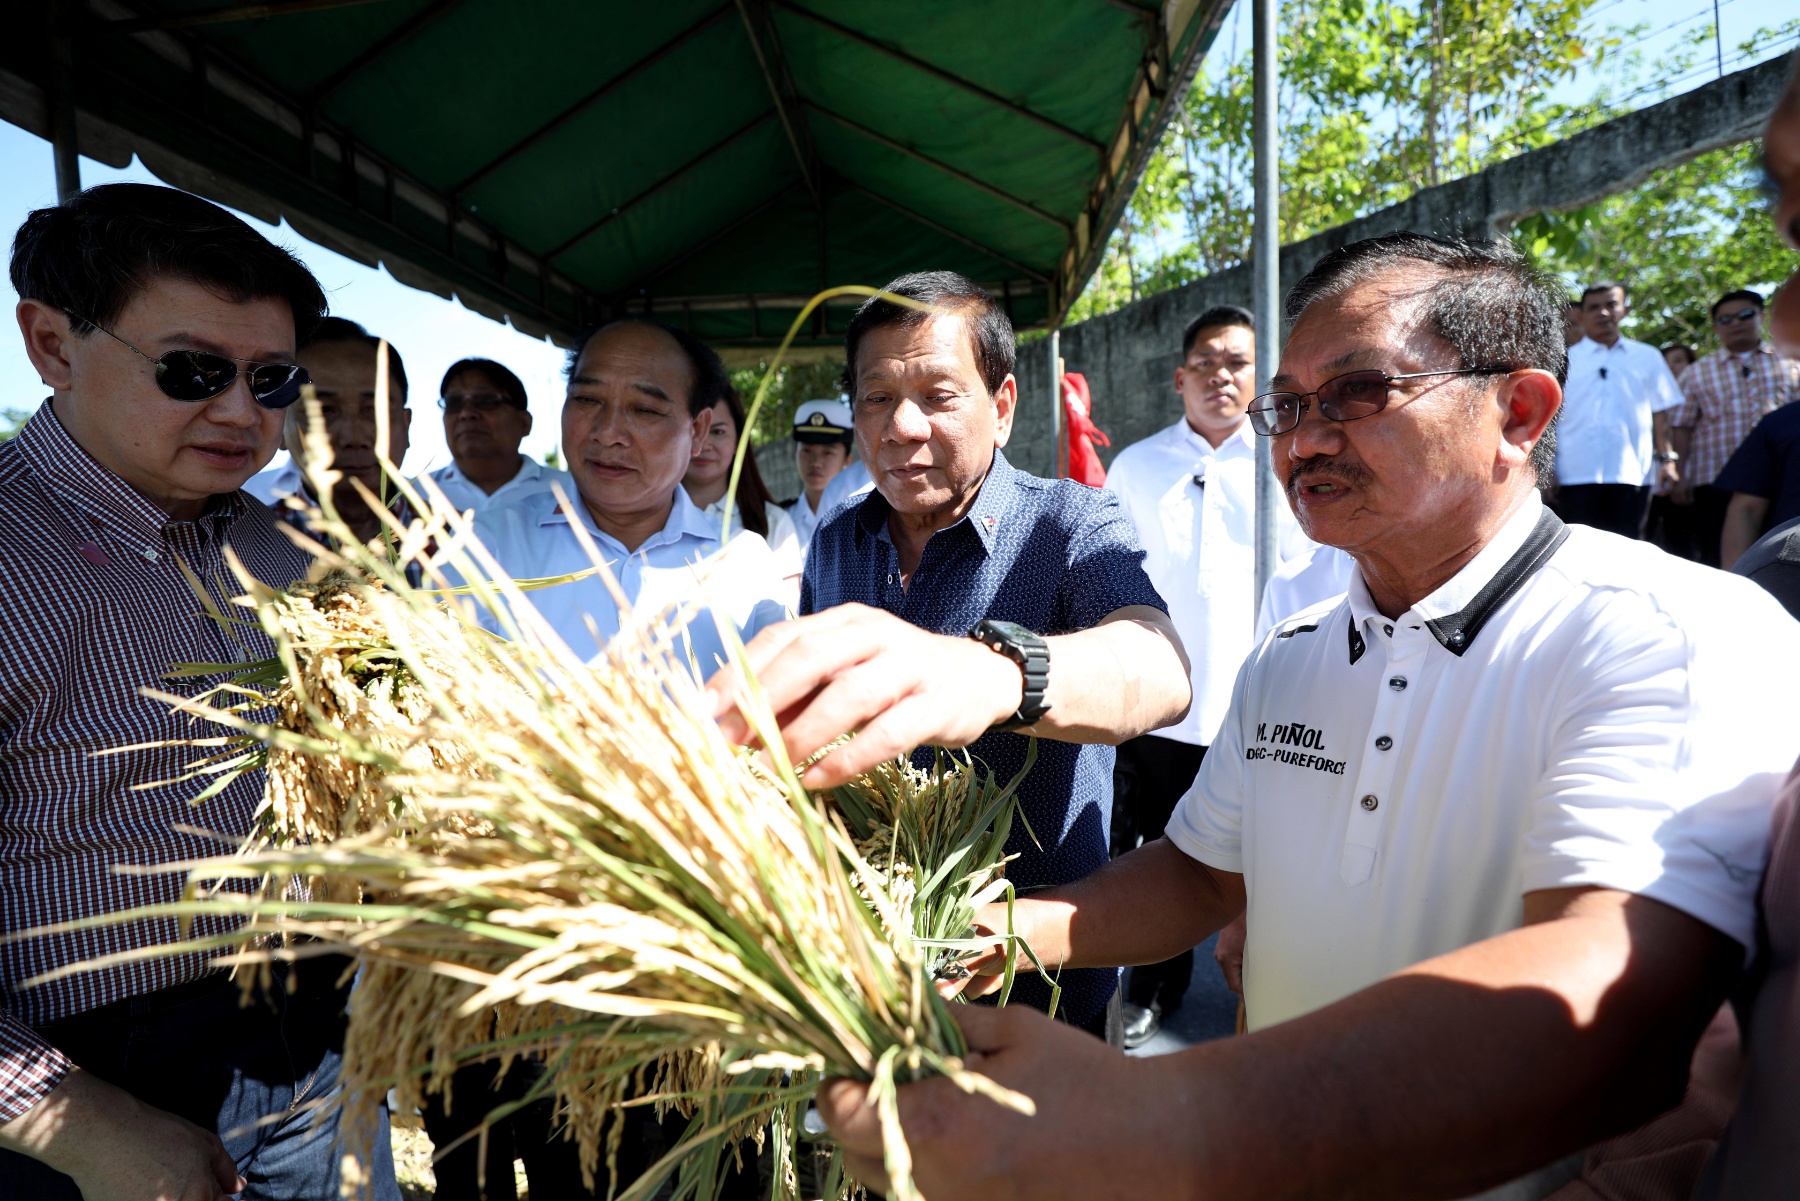 LOCAL PRODUCE. President Rodrigo Duterte checks the quality of the hybrid rice harvested during the Grand Harvest Festival of SL Agritech Corporation at the Nagkakaisang Magsasaka Agricultural Primary Multipurpose Cooperative (NMAPMPC) Compound in Talavera, Nueva Ecija on April 5, 2017. Malacañang file photo 